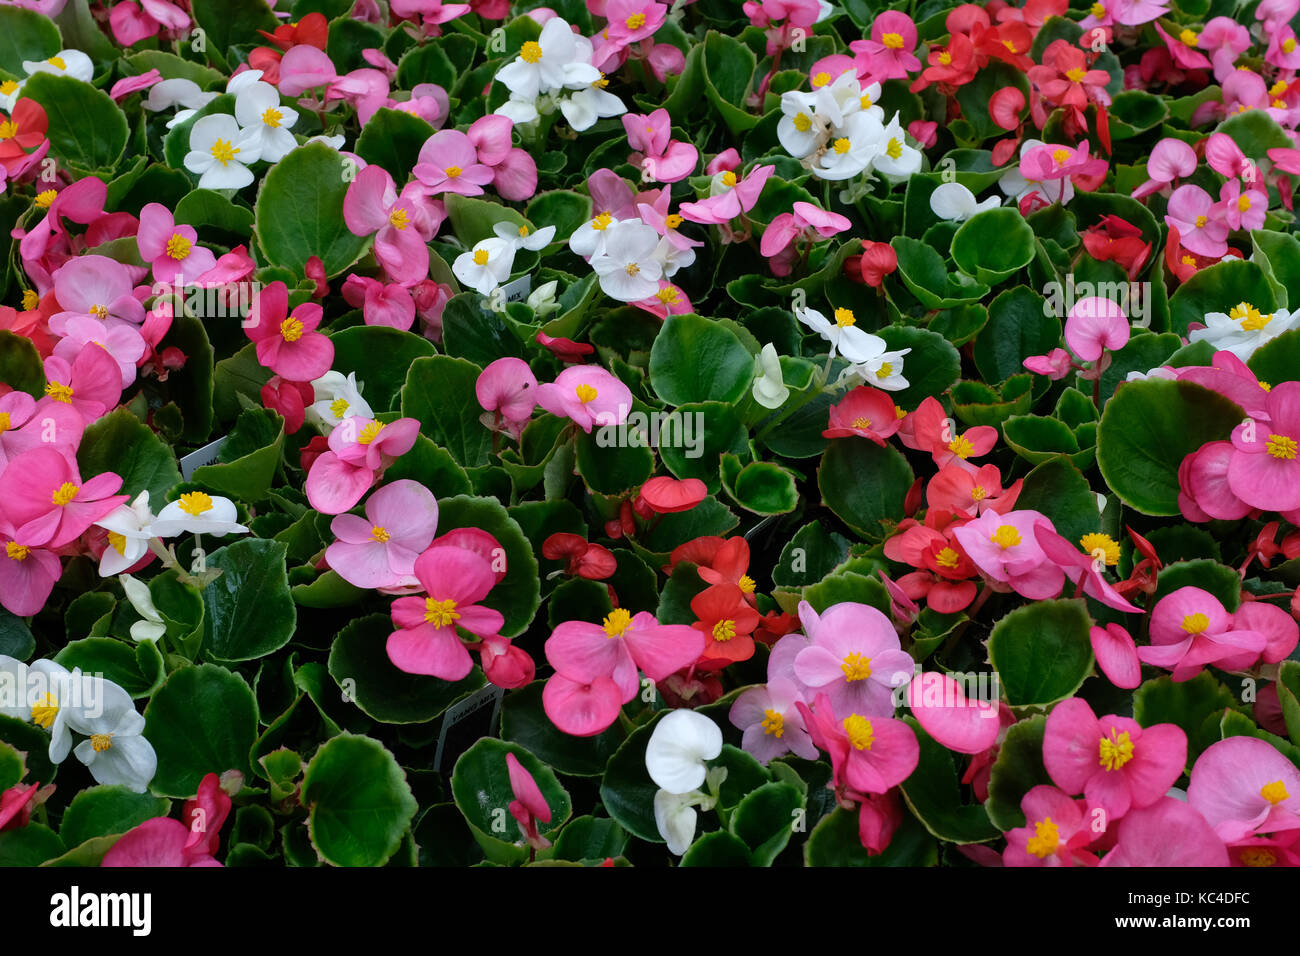 Colorful begonia flowers (Begoniaceae) for sale in greenhouse. Stock Photo